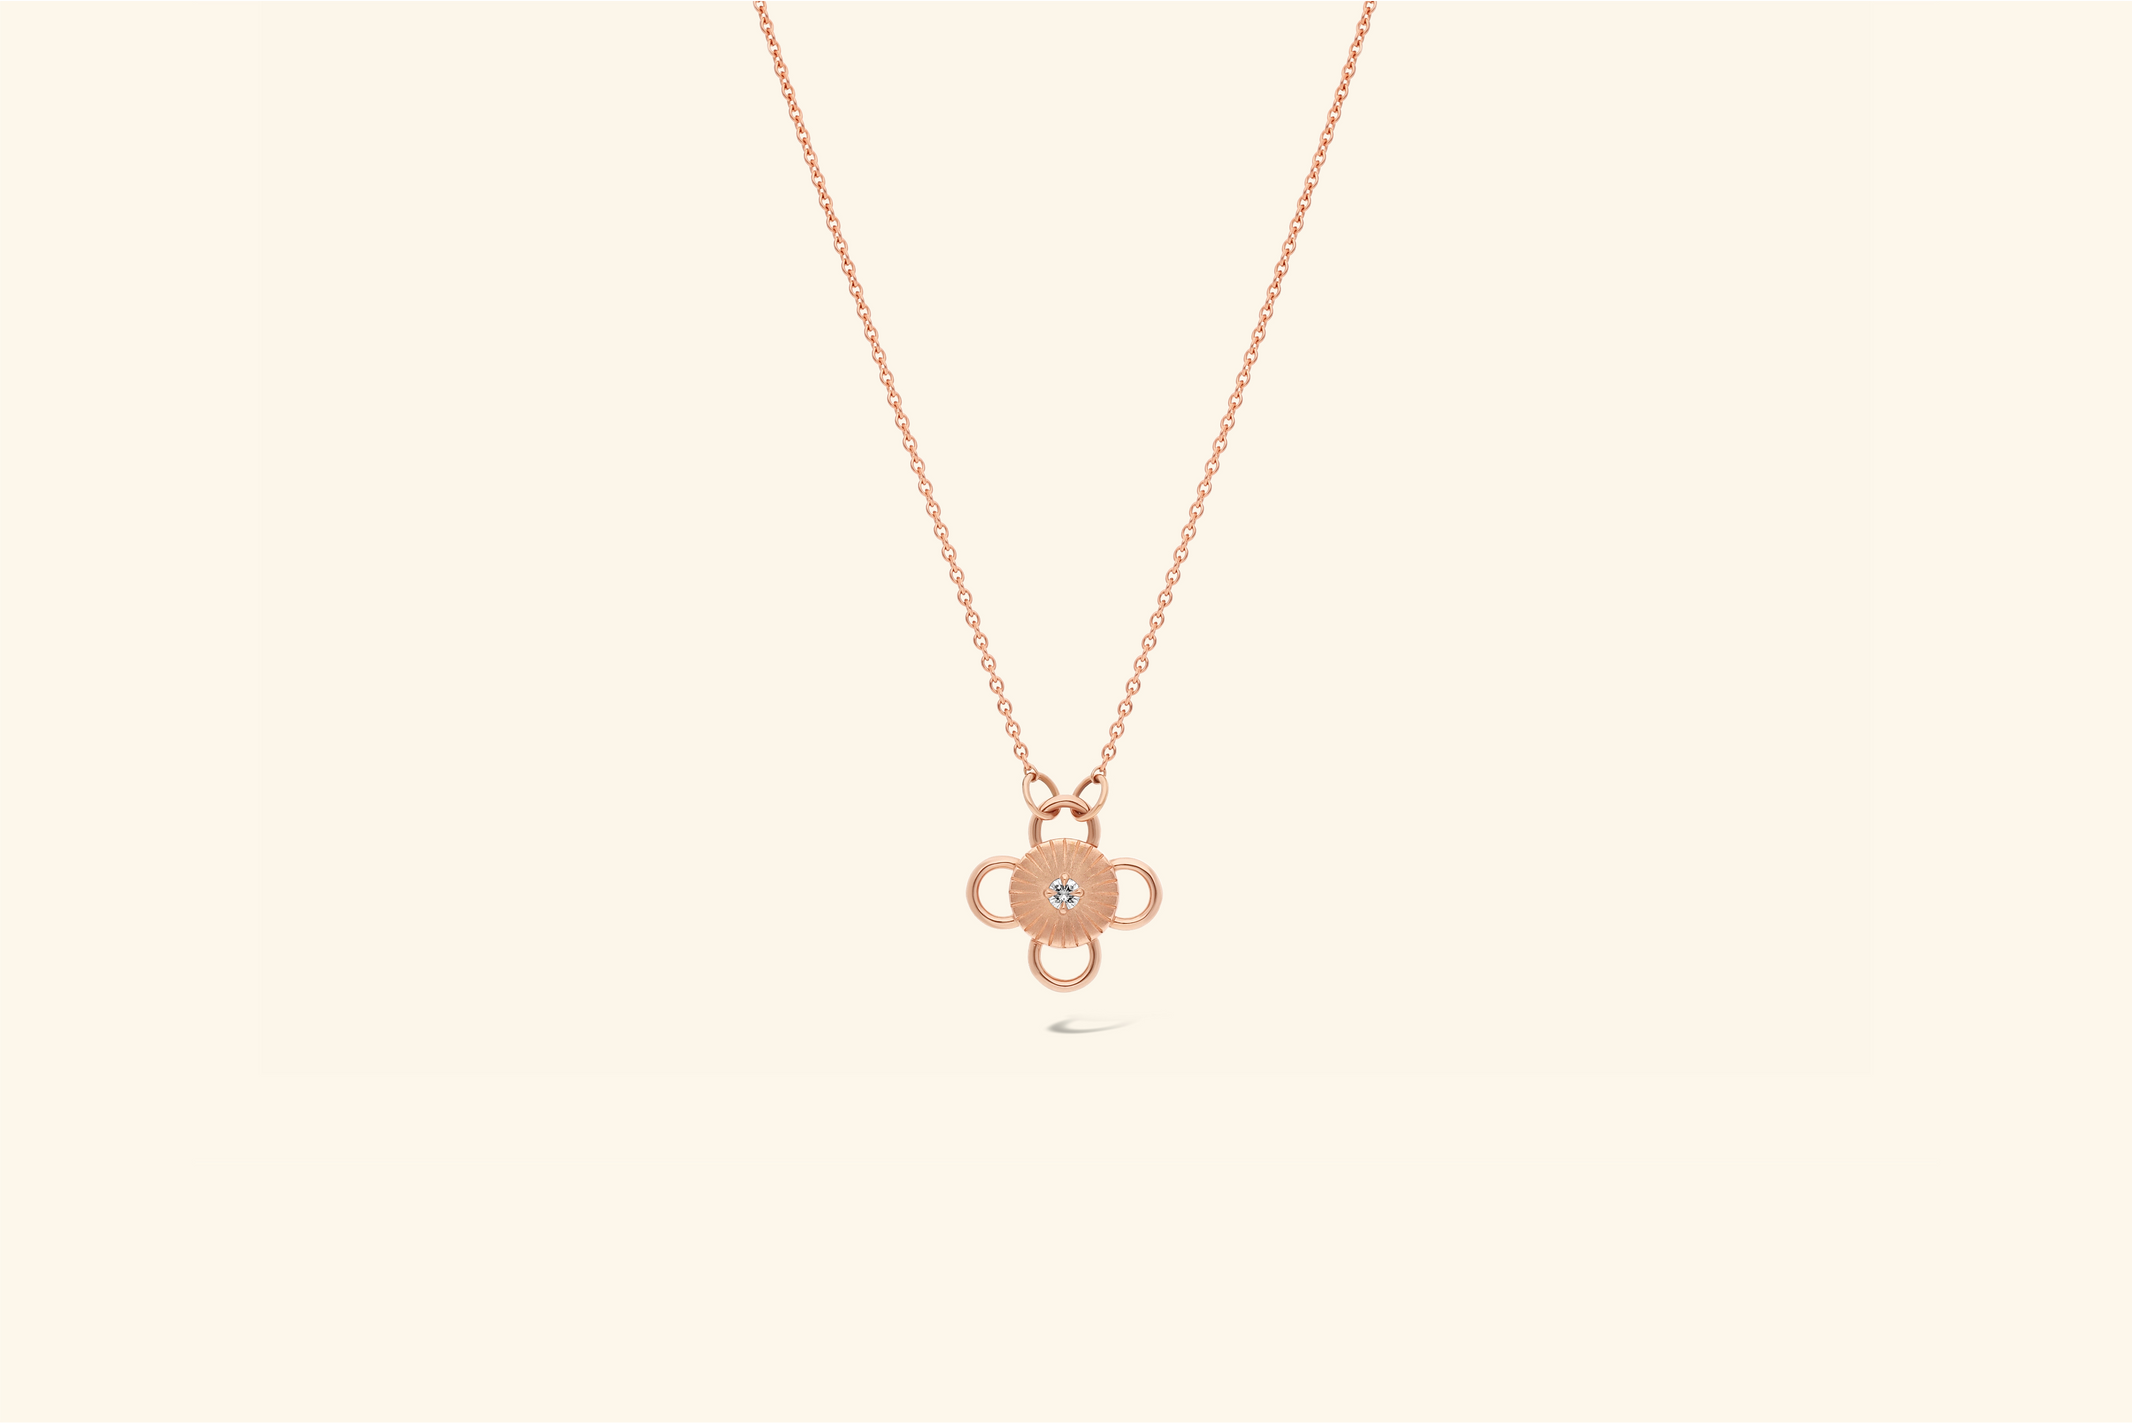 Baby Bolt Necklacea ~0.07 carat diamond set in a recycled rose gold motif.